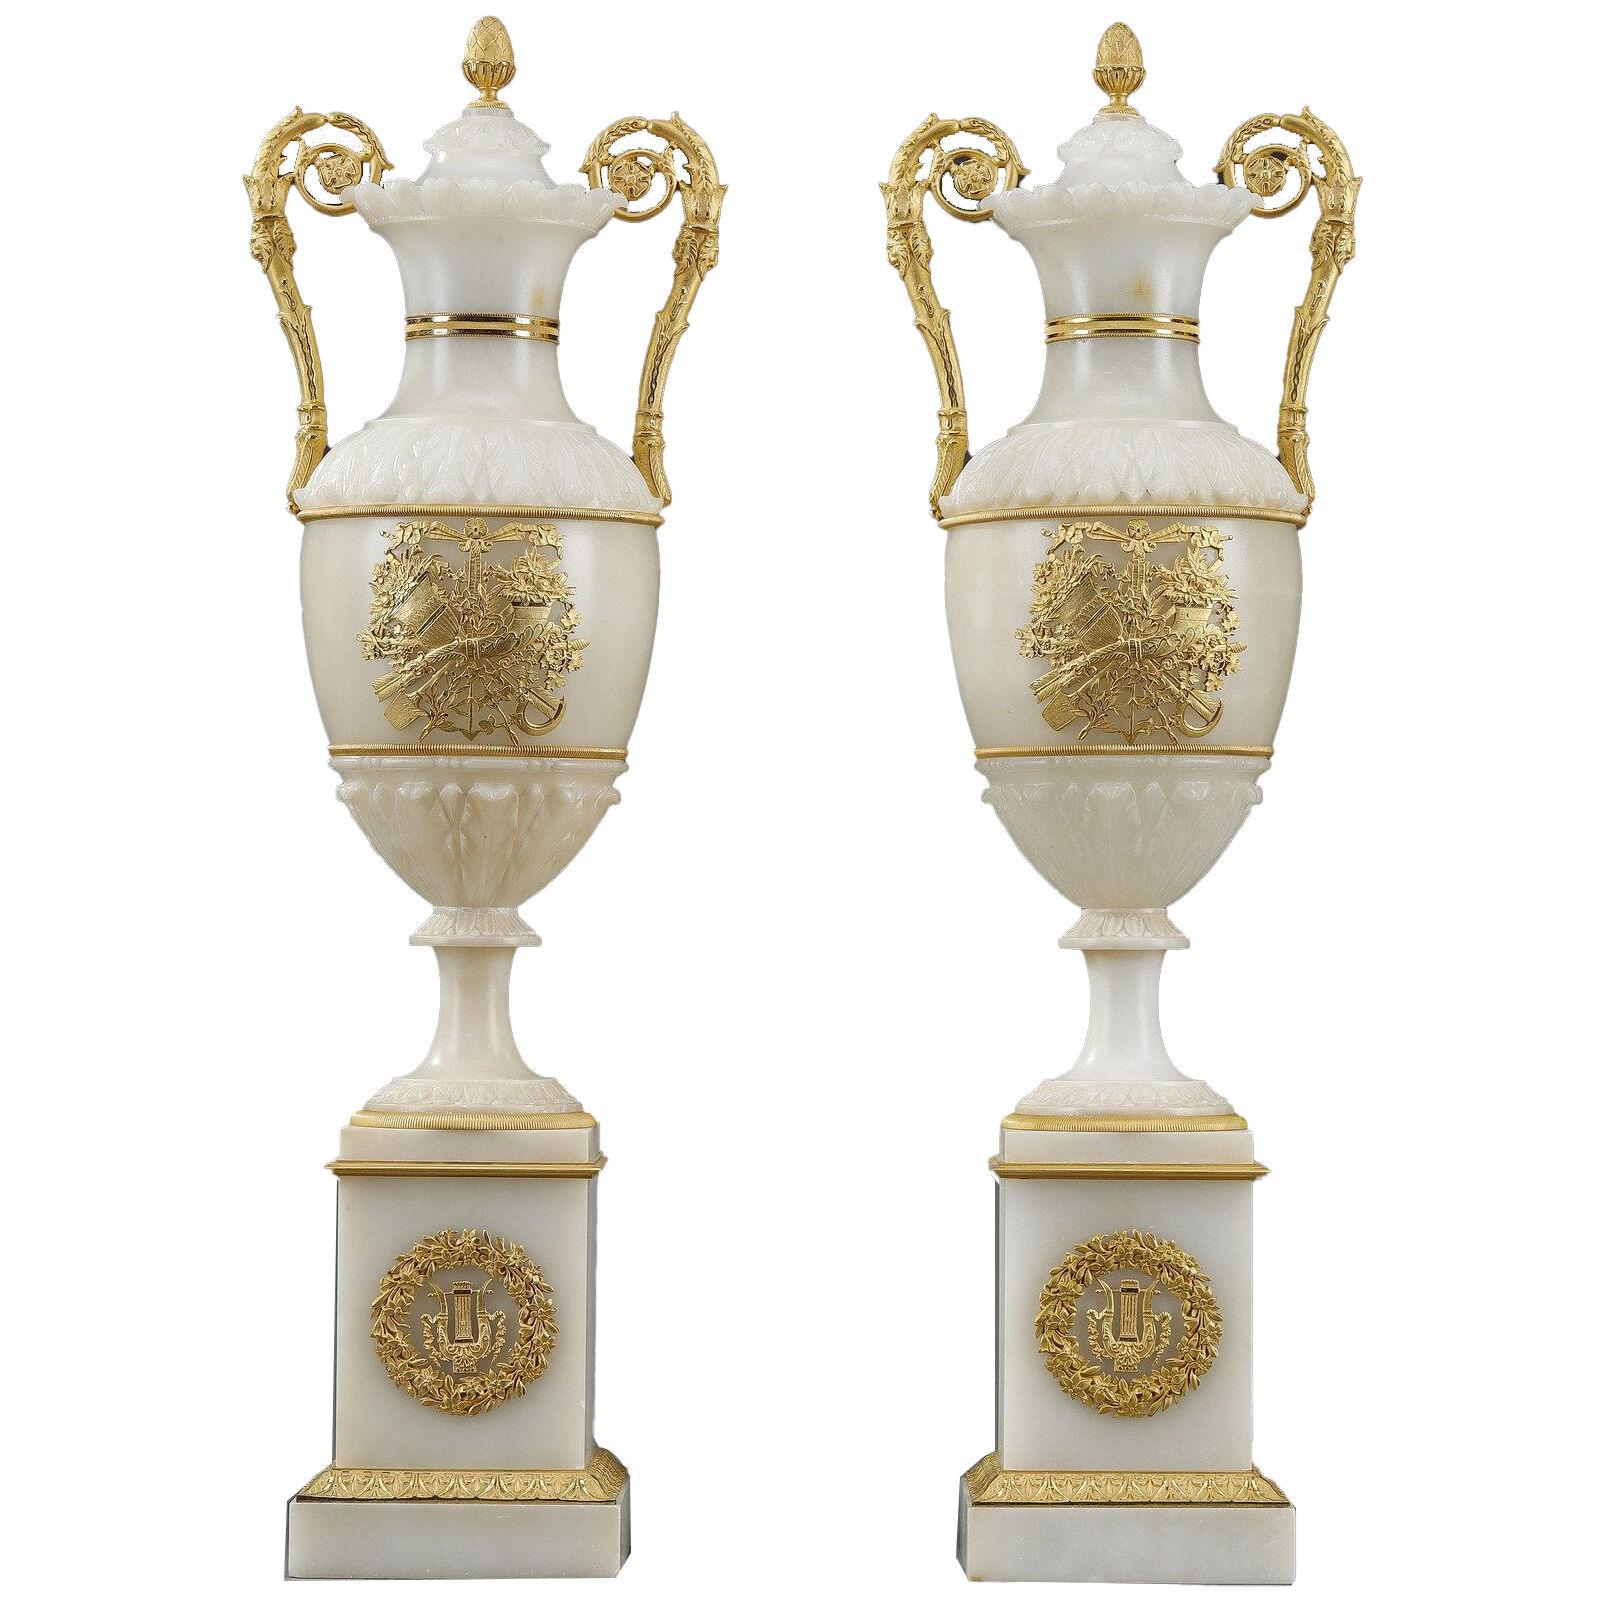 Pair of alabaster and gilt bronze covered vases